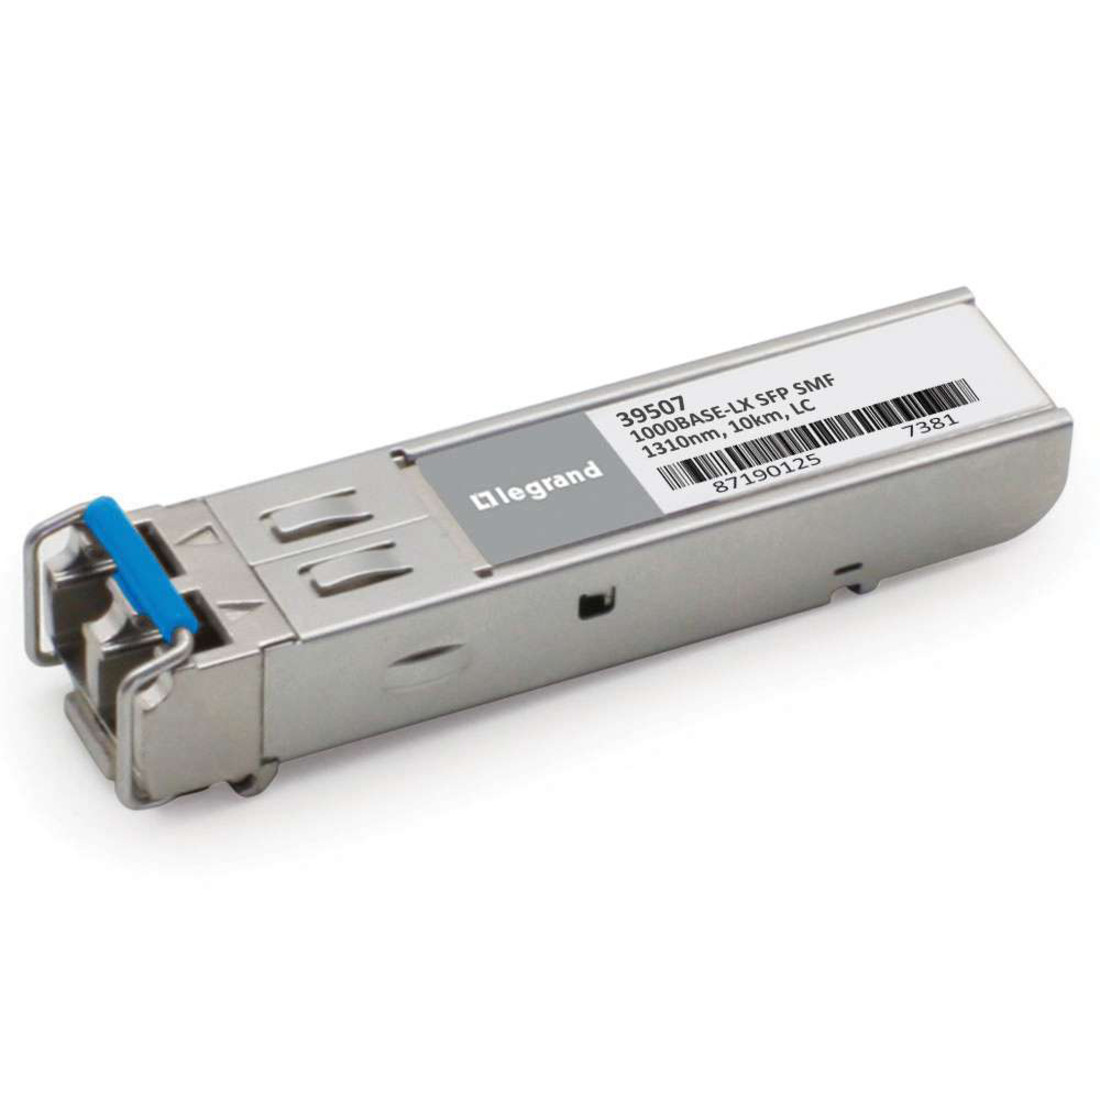 C2G Cisco SFP-GE-L Compatible 1000Base-LX SMF SFP (mini-GBIC) Transceiver ModuleFor Optical Network, Data Networking1 x LC 1000BASE-LX Netwo… 39463